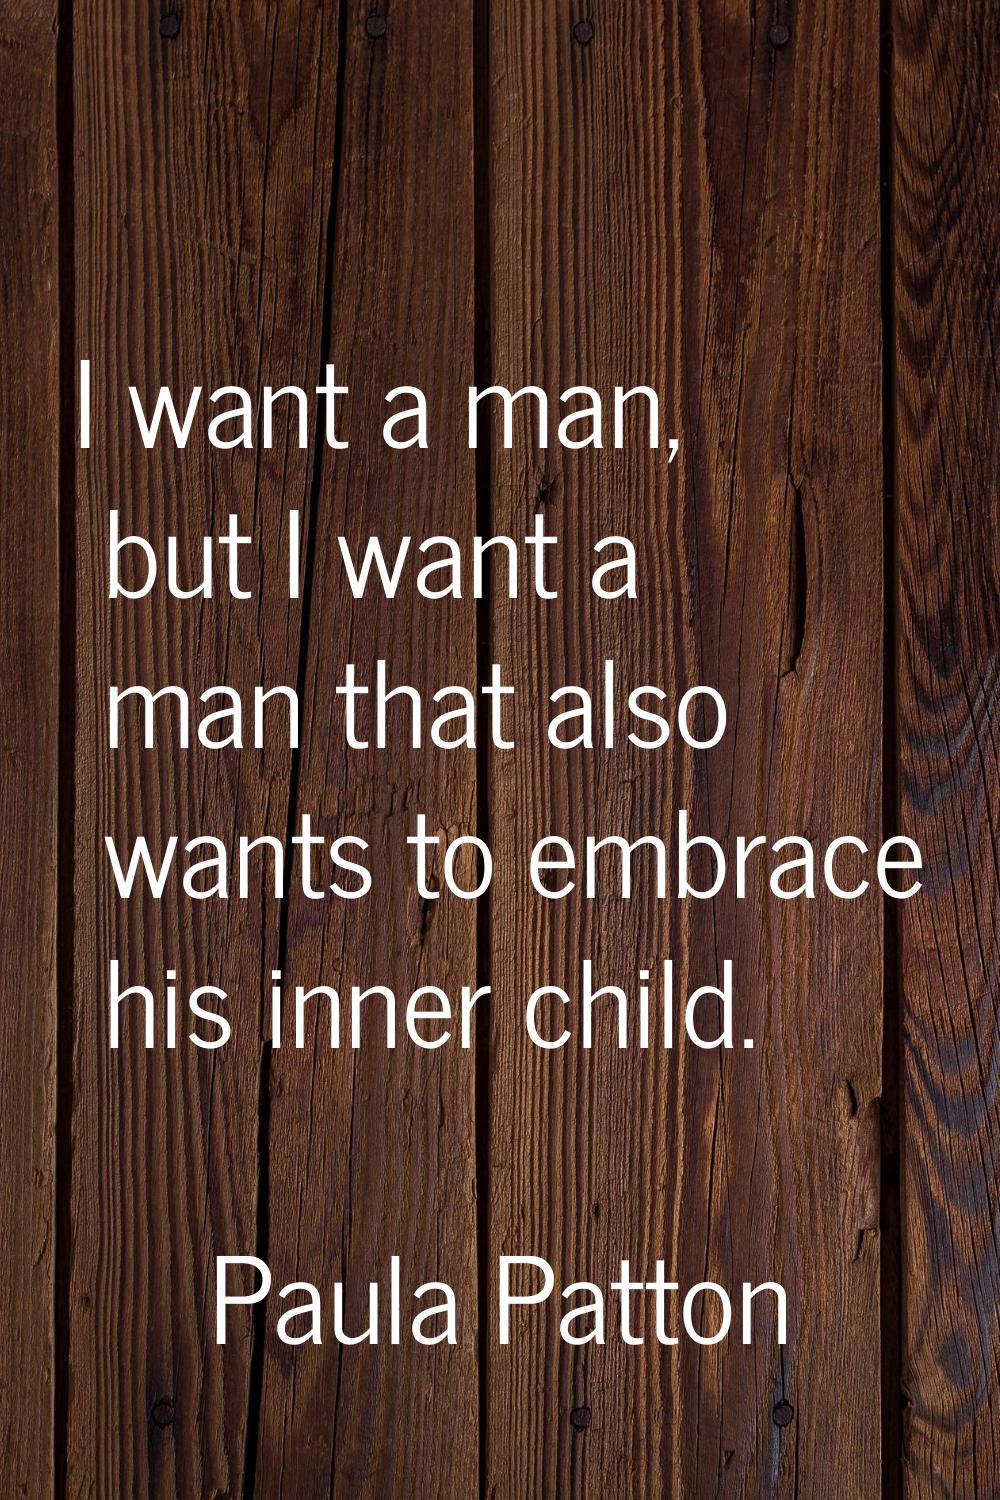 I want a man, but I want a man that also wants to embrace his inner child.